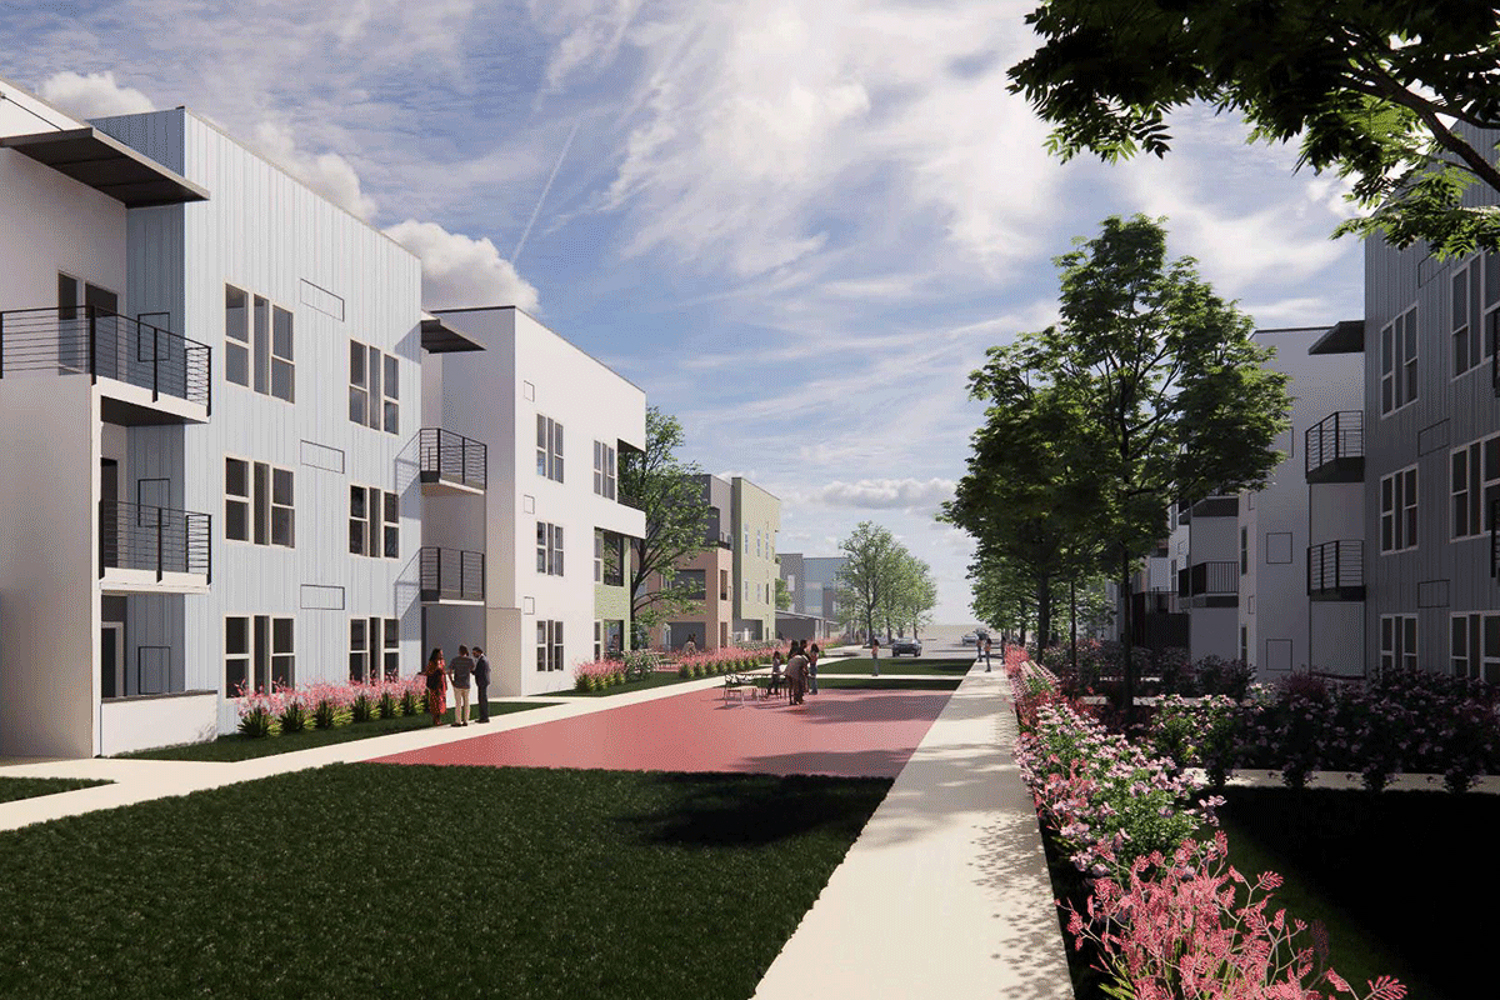 Township 9 townhomes pedestrian pathway, rendering by Architects Local